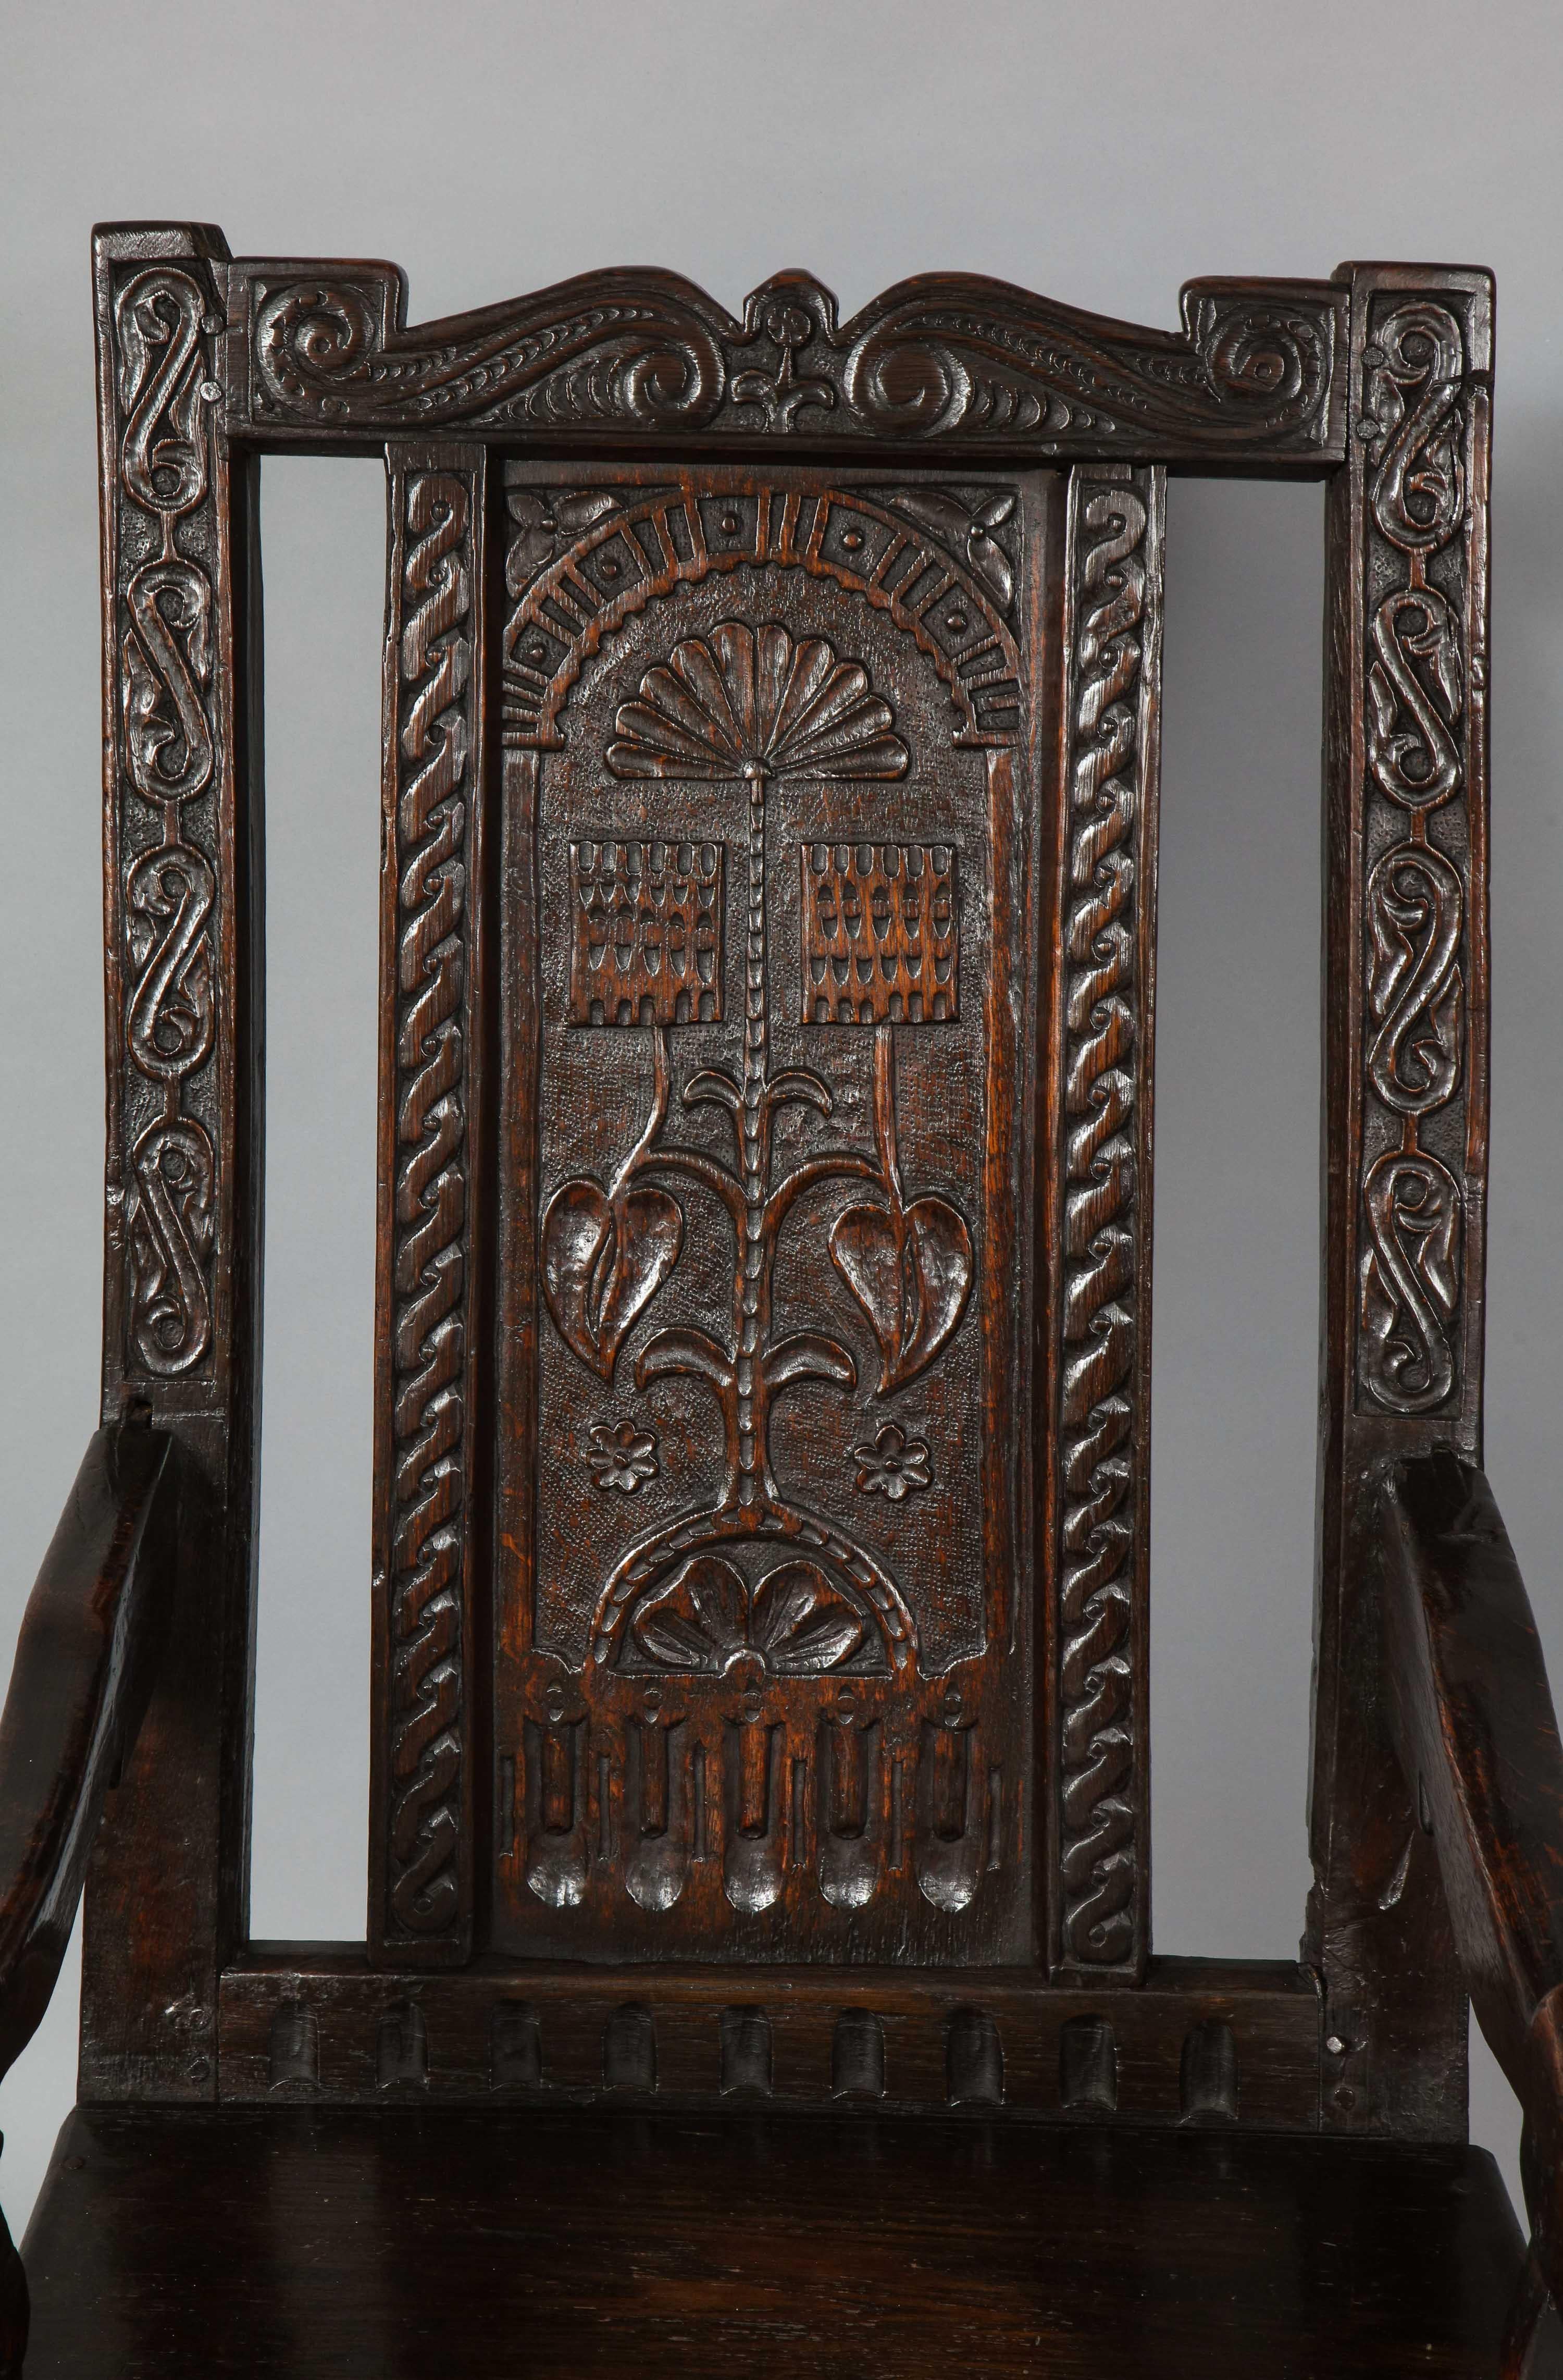 Baroque 17th Century English or Welsh Wainscot Chair